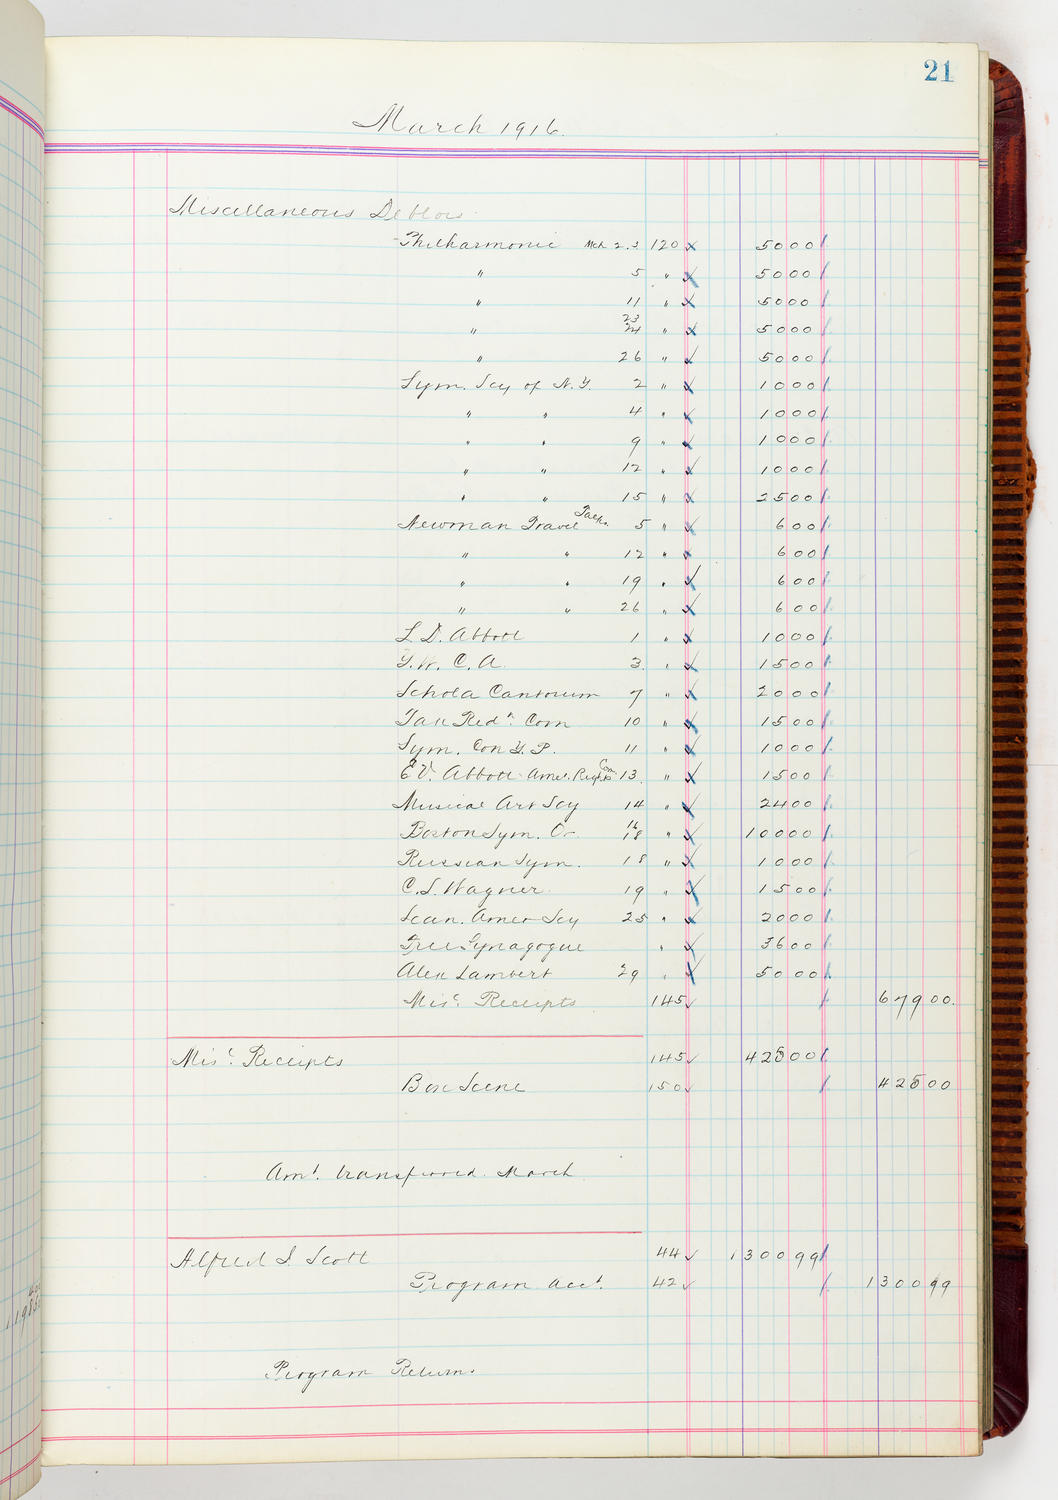 Music Hall Accounting Ledger, volume 5, page 21